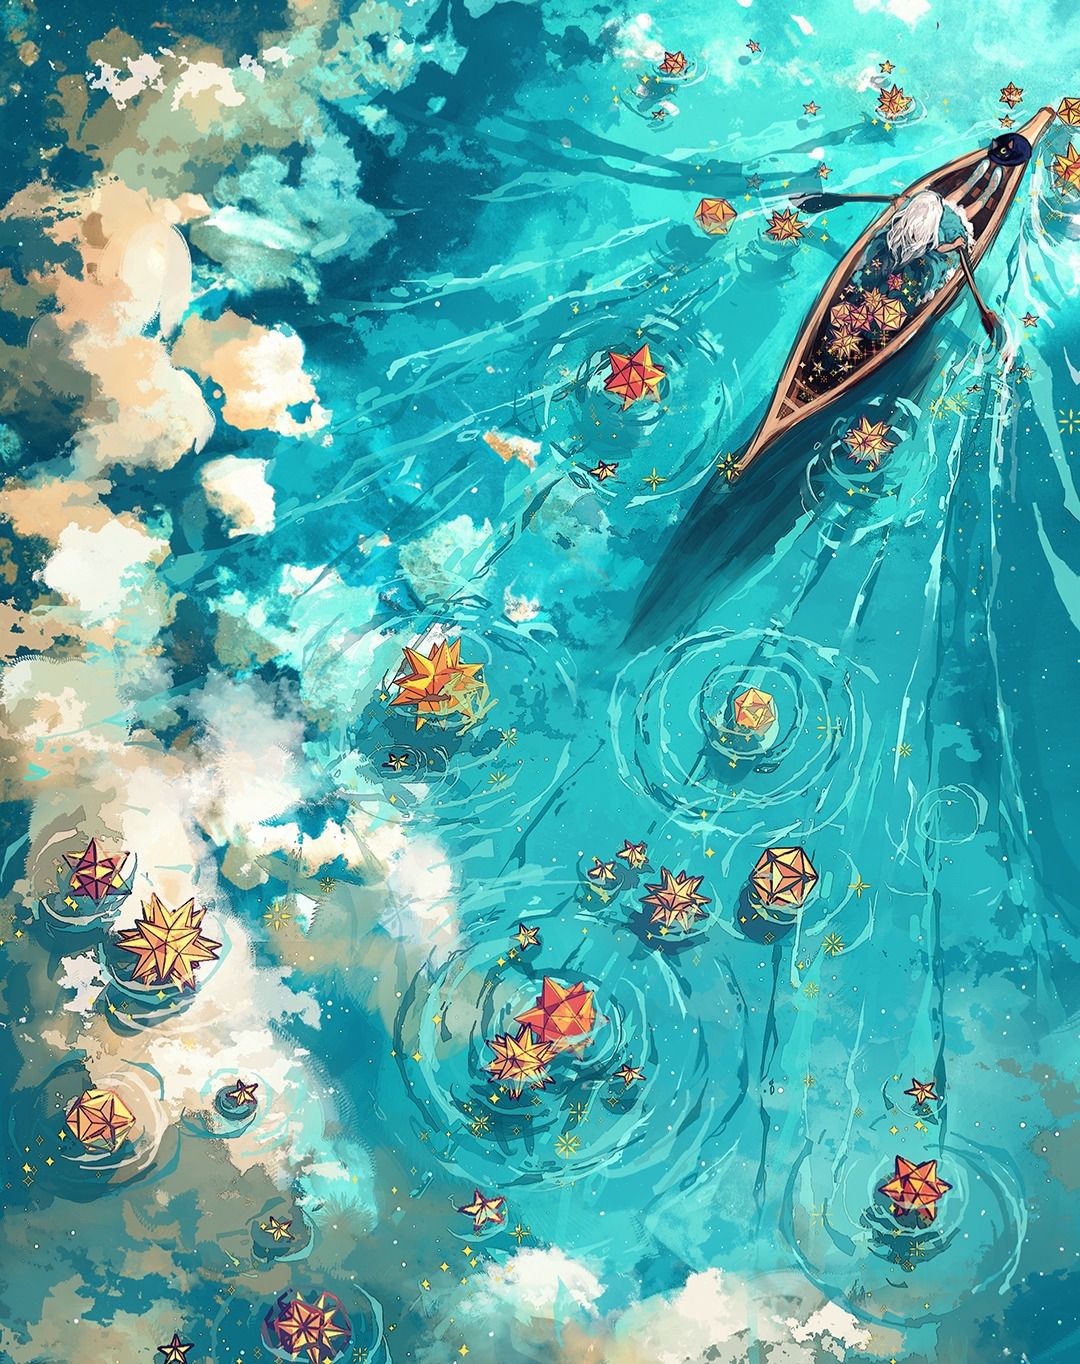 Absolutely Stunning Surrealistic Digital Illustrations By Wenqing Yan (6)